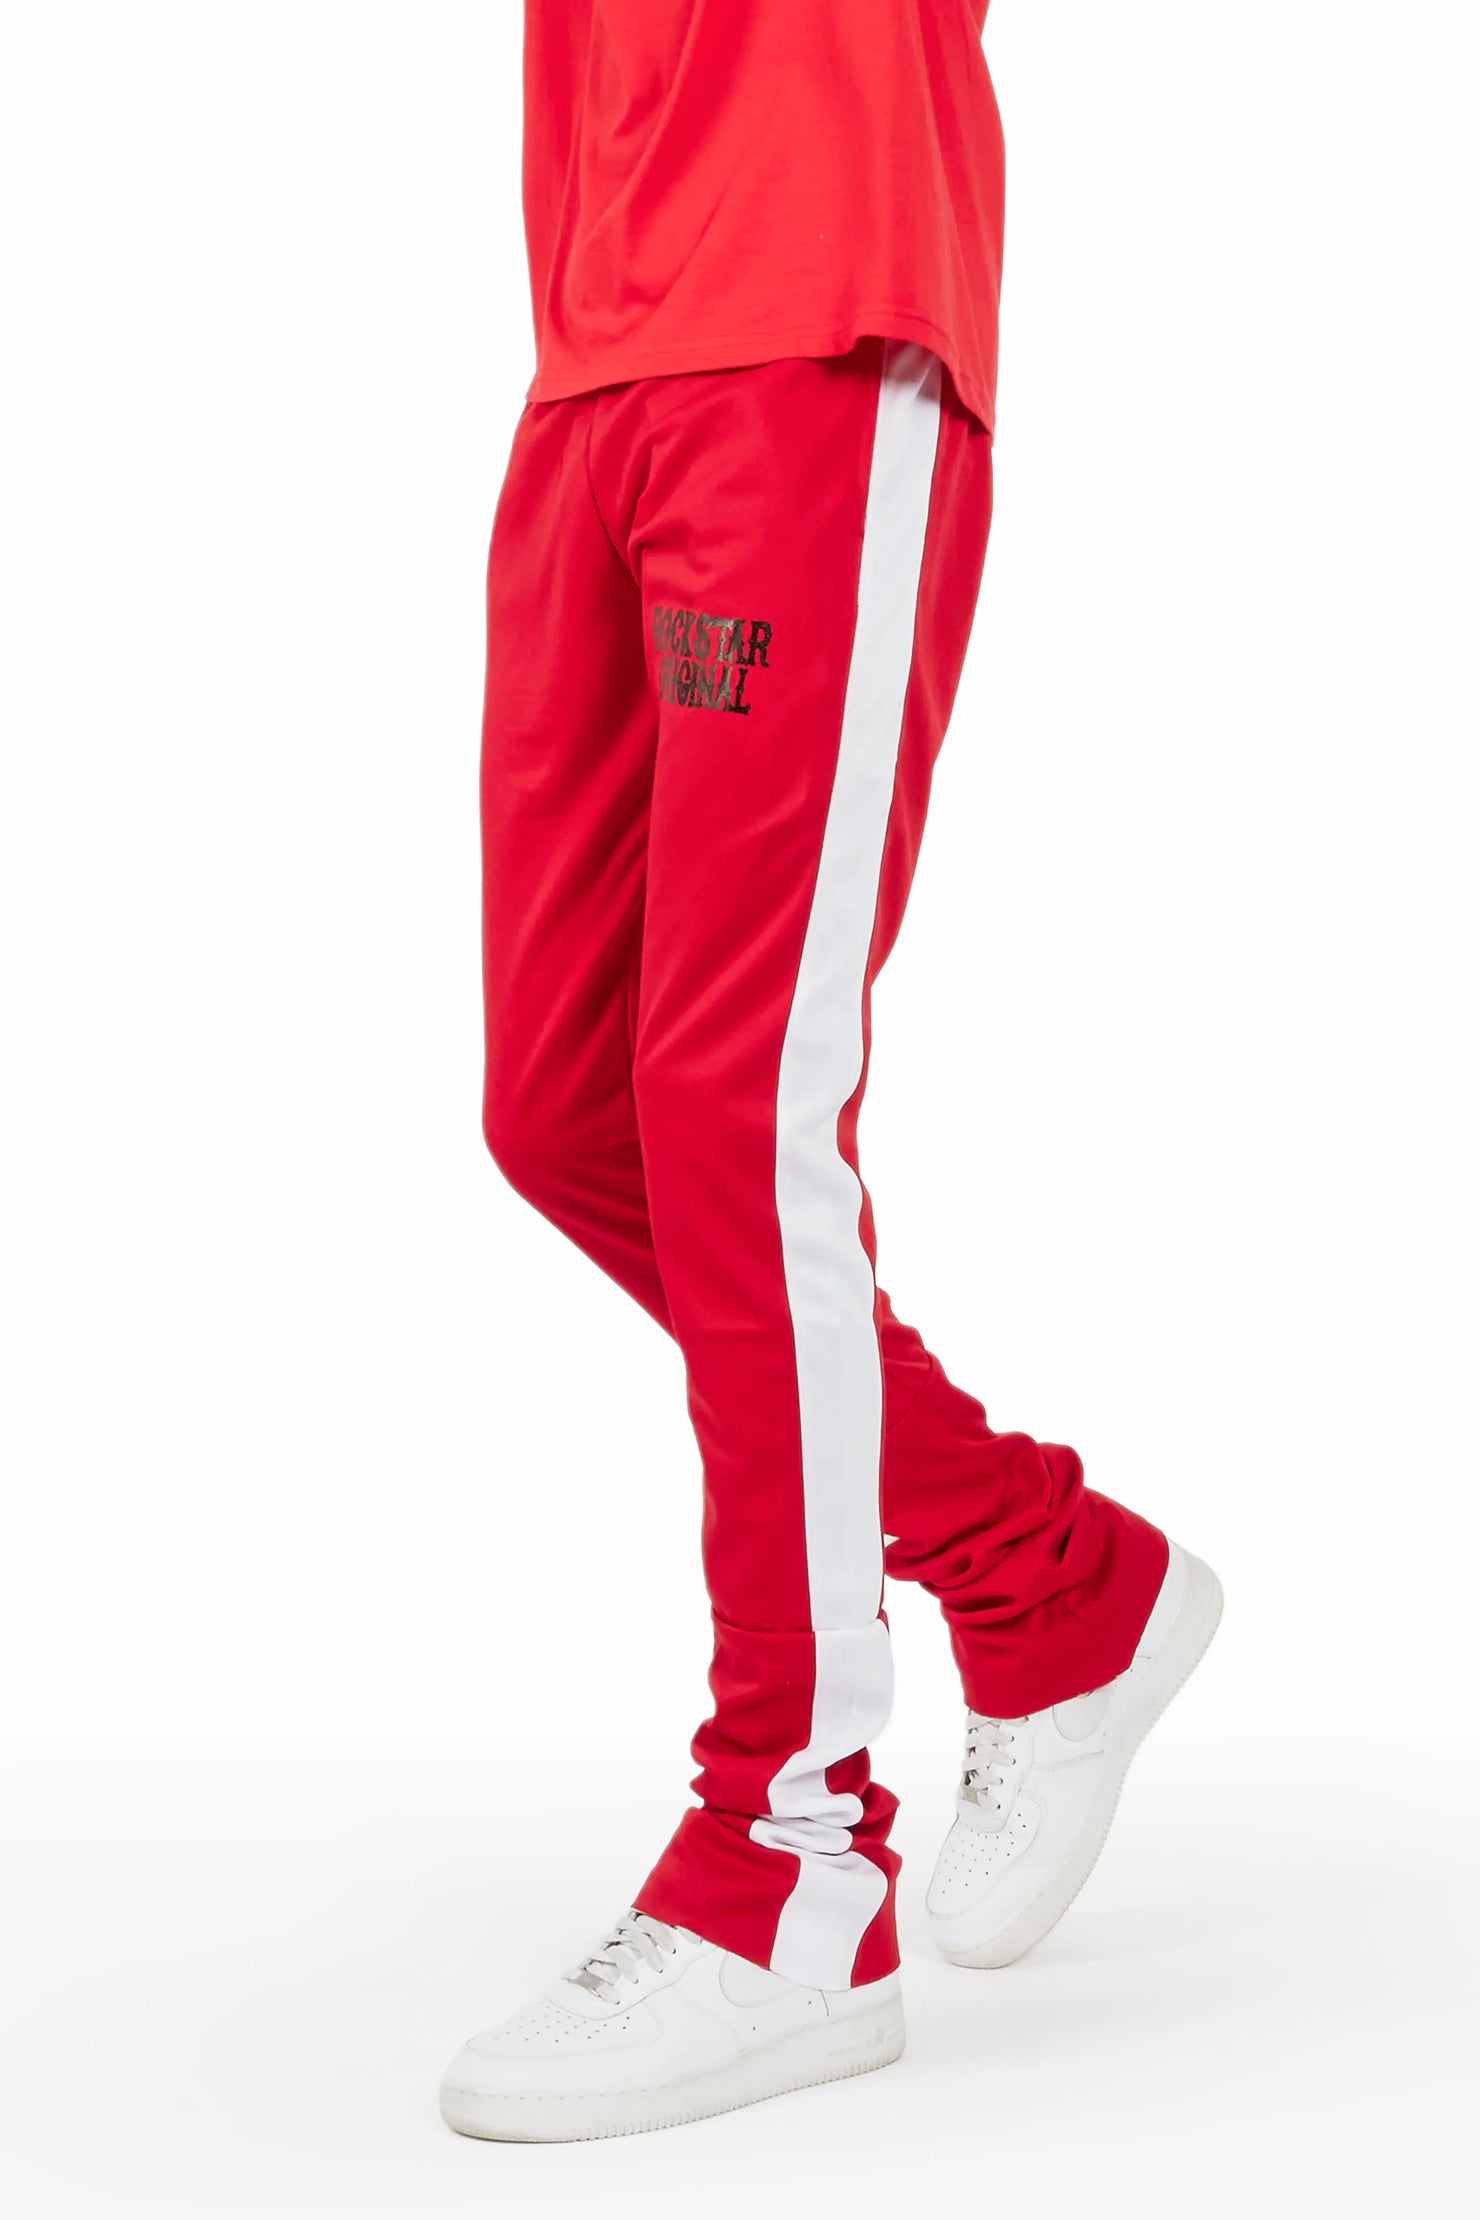 Politics Super Stacked Sweatpants - Red And White - Foster701